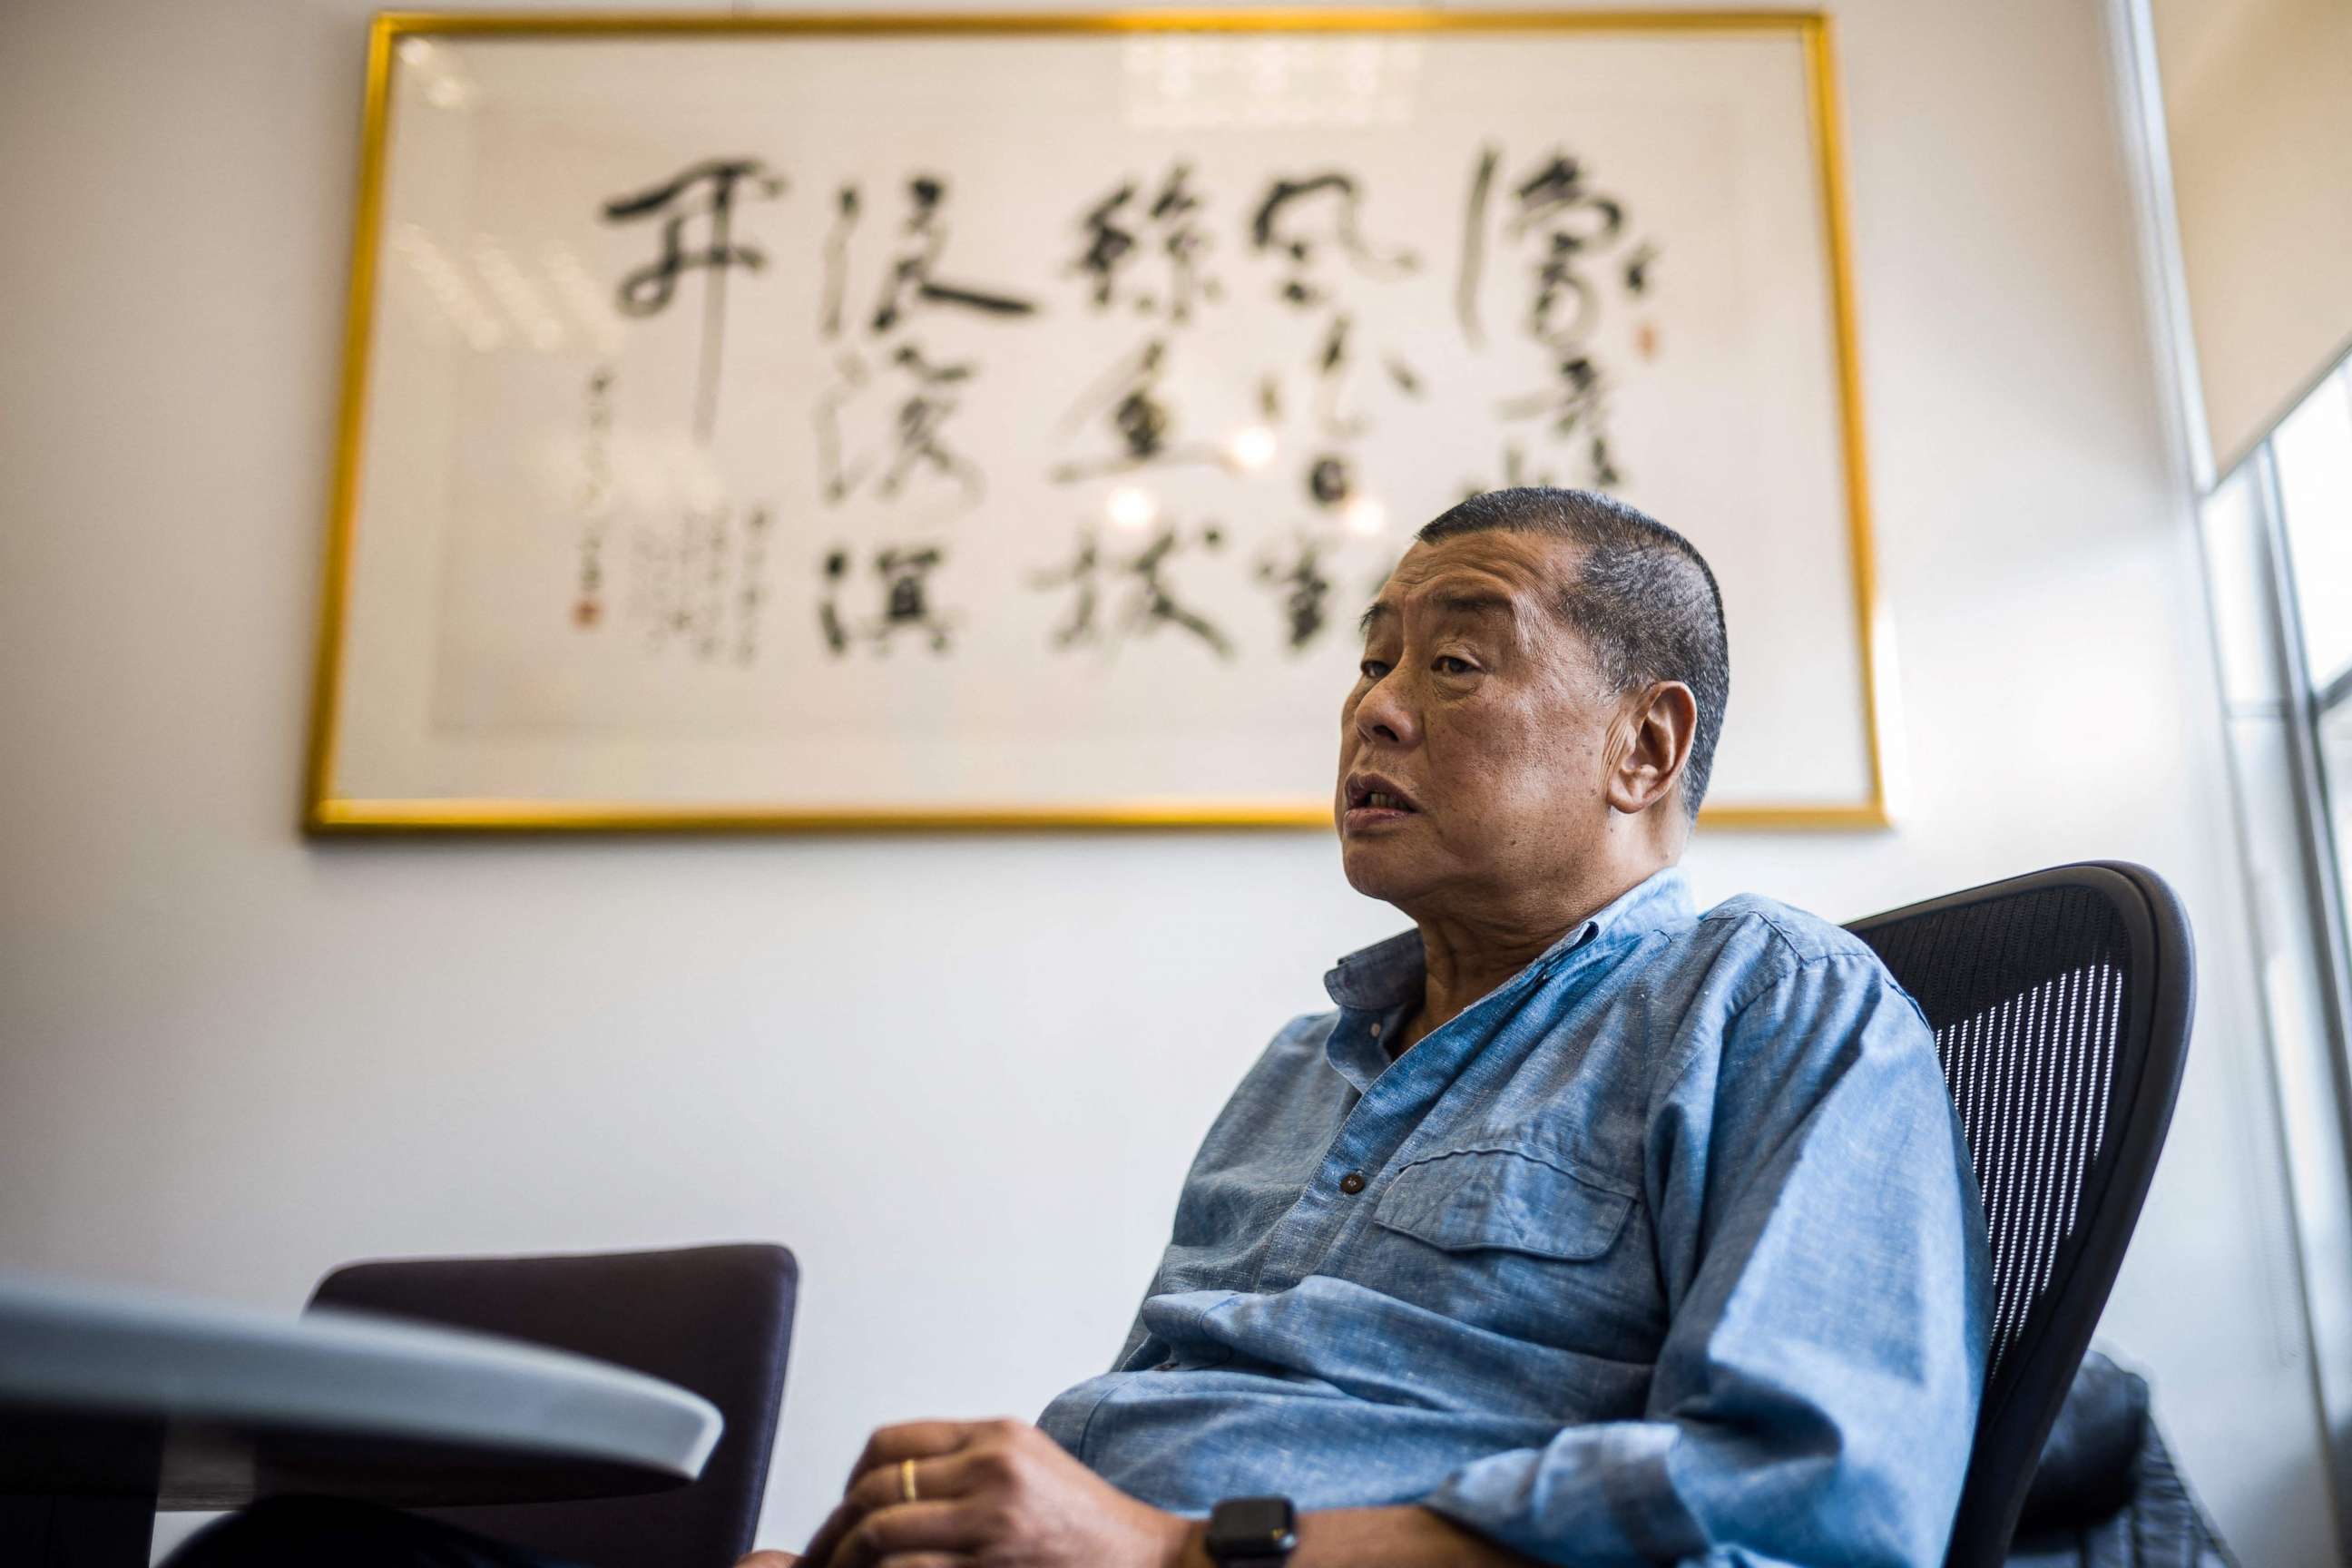 PHOTO: In this file photo taken on June 16, 2020, millionaire media tycoon Jimmy Lai, 72, speaks during an interview with AFP at the Next Digital offices in Hong Kong.